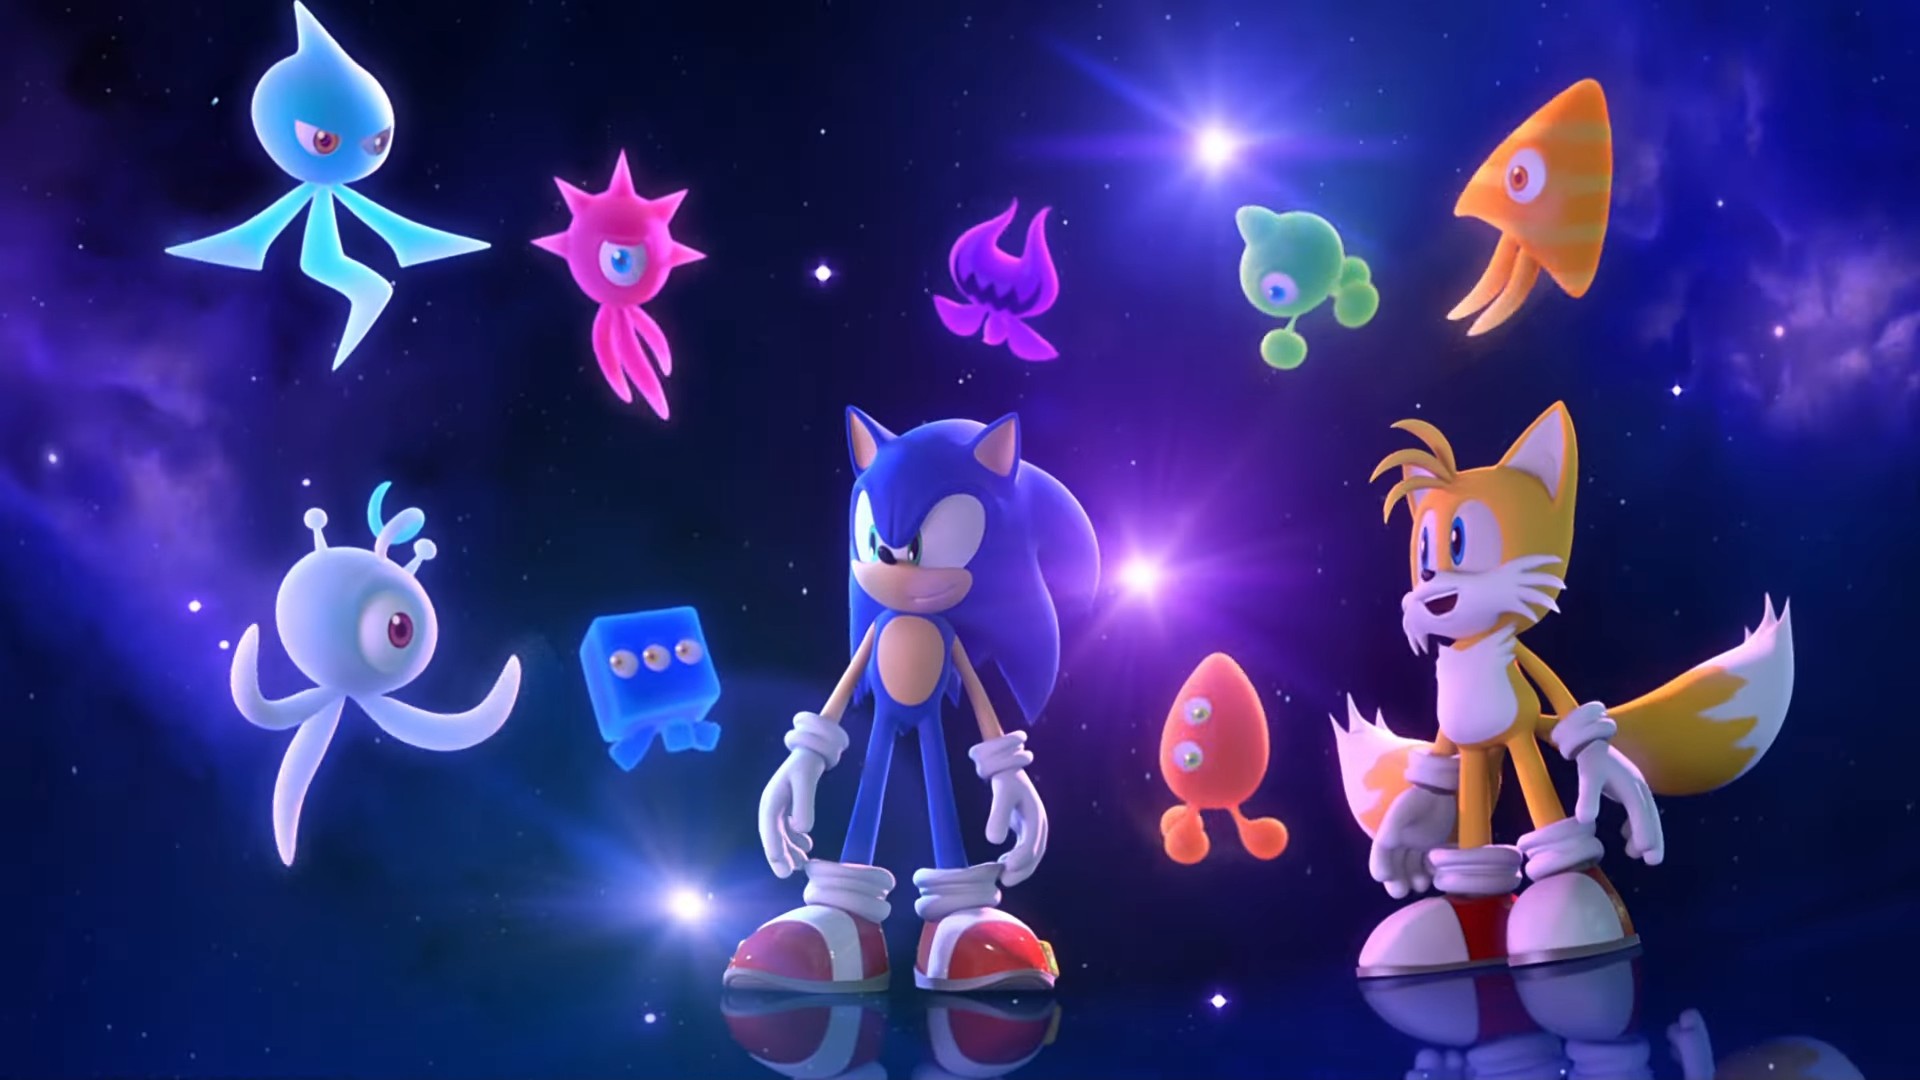 Tails  Sonic Colors wallpaper by andyemanrique  Download on ZEDGE  a911